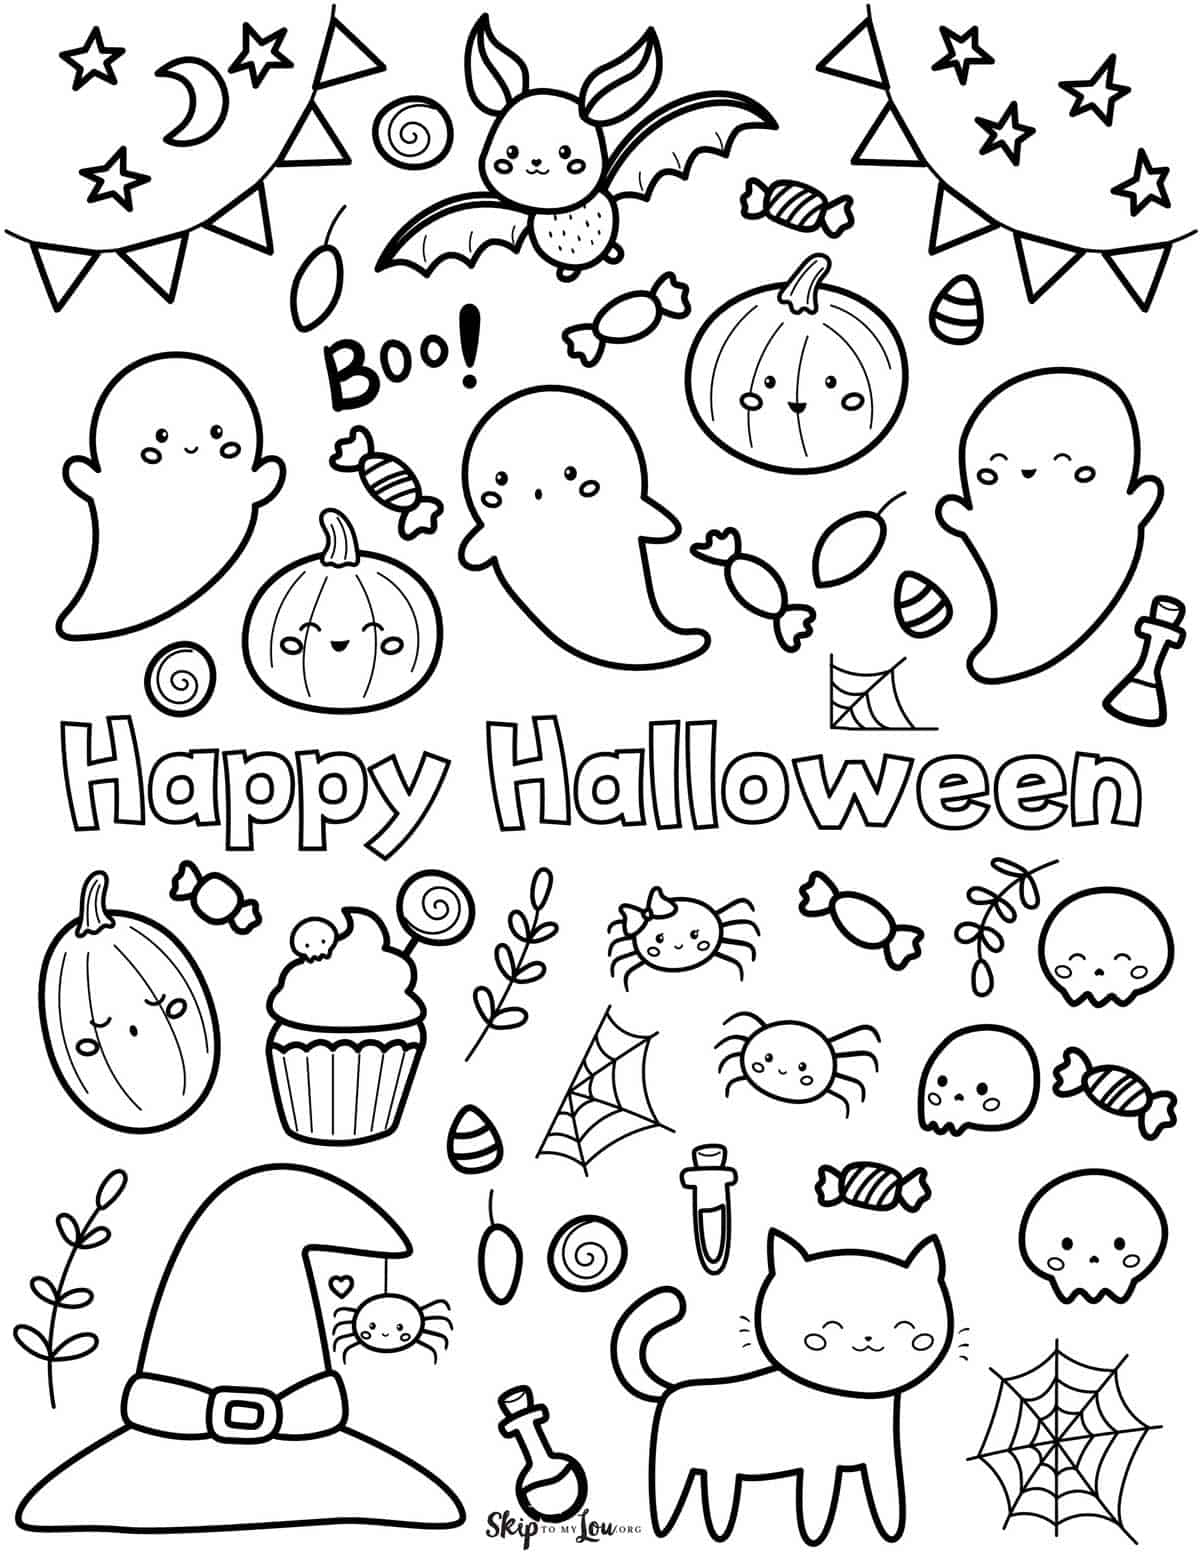 Perhaps the best 20 Cute Halloween Coloring Pages – homeicon.info